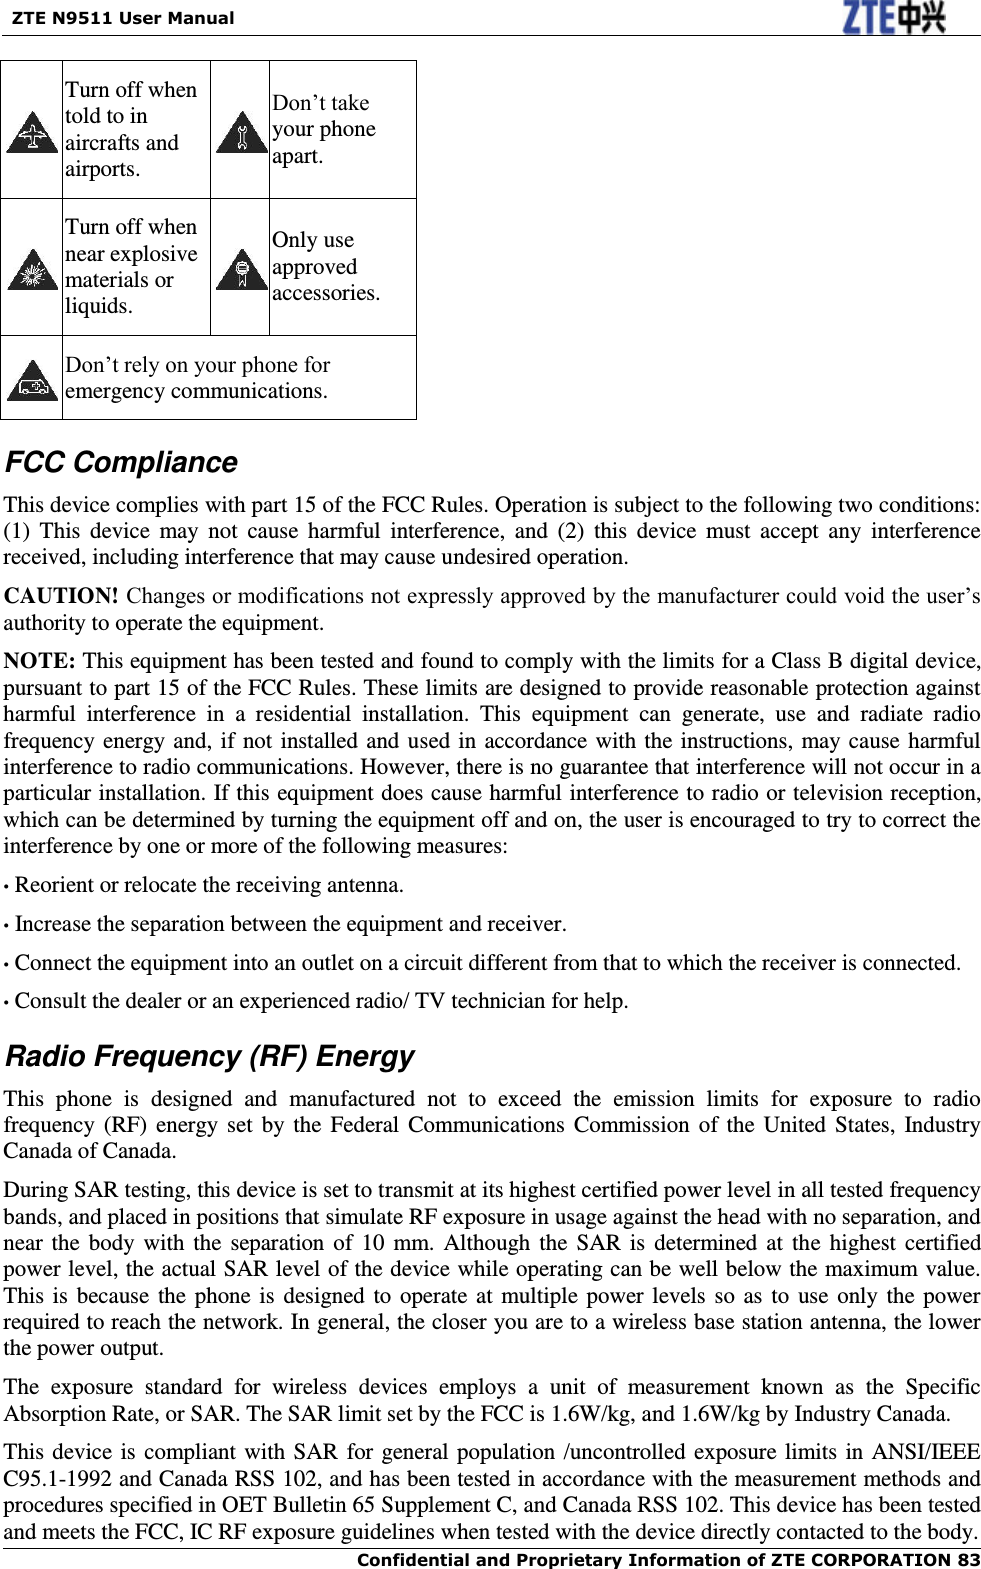   ZTE N9511 User Manual    Confidential and Proprietary Information of ZTE CORPORATION 83  Turn off when told to in aircrafts and airports.  Don’t take your phone apart.  Turn off when near explosive materials or liquids.  Only use approved accessories.  Don’t rely on your phone for emergency communications.   FCC Compliance This device complies with part 15 of the FCC Rules. Operation is subject to the following two conditions: (1)  This  device  may  not  cause  harmful  interference,  and  (2)  this  device  must  accept  any  interference received, including interference that may cause undesired operation.   CAUTION! Changes or modifications not expressly approved by the manufacturer could void the user’s authority to operate the equipment.   NOTE: This equipment has been tested and found to comply with the limits for a Class B digital device, pursuant to part 15 of the FCC Rules. These limits are designed to provide reasonable protection against harmful  interference  in  a  residential  installation.  This  equipment  can  generate,  use  and  radiate  radio frequency energy and, if not installed and used in accordance with the instructions, may cause harmful interference to radio communications. However, there is no guarantee that interference will not occur in a particular installation. If this equipment does cause harmful interference to radio or television reception, which can be determined by turning the equipment off and on, the user is encouraged to try to correct the interference by one or more of the following measures: • Reorient or relocate the receiving antenna. • Increase the separation between the equipment and receiver. • Connect the equipment into an outlet on a circuit different from that to which the receiver is connected. • Consult the dealer or an experienced radio/ TV technician for help. Radio Frequency (RF) Energy This  phone  is  designed  and  manufactured  not  to  exceed  the  emission  limits  for  exposure  to  radio frequency (RF) energy set by the  Federal  Communications Commission  of  the  United  States,  Industry Canada of Canada.   During SAR testing, this device is set to transmit at its highest certified power level in all tested frequency bands, and placed in positions that simulate RF exposure in usage against the head with no separation, and near the  body  with  the  separation of  10  mm.  Although the  SAR  is  determined at  the  highest  certified power level, the actual SAR level of the device while operating can be well below the maximum value.   This is  because the phone is designed to operate at multiple power levels so  as to use only the power required to reach the network. In general, the closer you are to a wireless base station antenna, the lower the power output. The  exposure  standard  for  wireless  devices  employs  a  unit  of  measurement  known  as  the  Specific Absorption Rate, or SAR. The SAR limit set by the FCC is 1.6W/kg, and 1.6W/kg by Industry Canada.     This device is compliant with SAR for general population /uncontrolled exposure limits in ANSI/IEEE C95.1-1992 and Canada RSS 102, and has been tested in accordance with the measurement methods and procedures specified in OET Bulletin 65 Supplement C, and Canada RSS 102. This device has been tested and meets the FCC, IC RF exposure guidelines when tested with the device directly contacted to the body.   